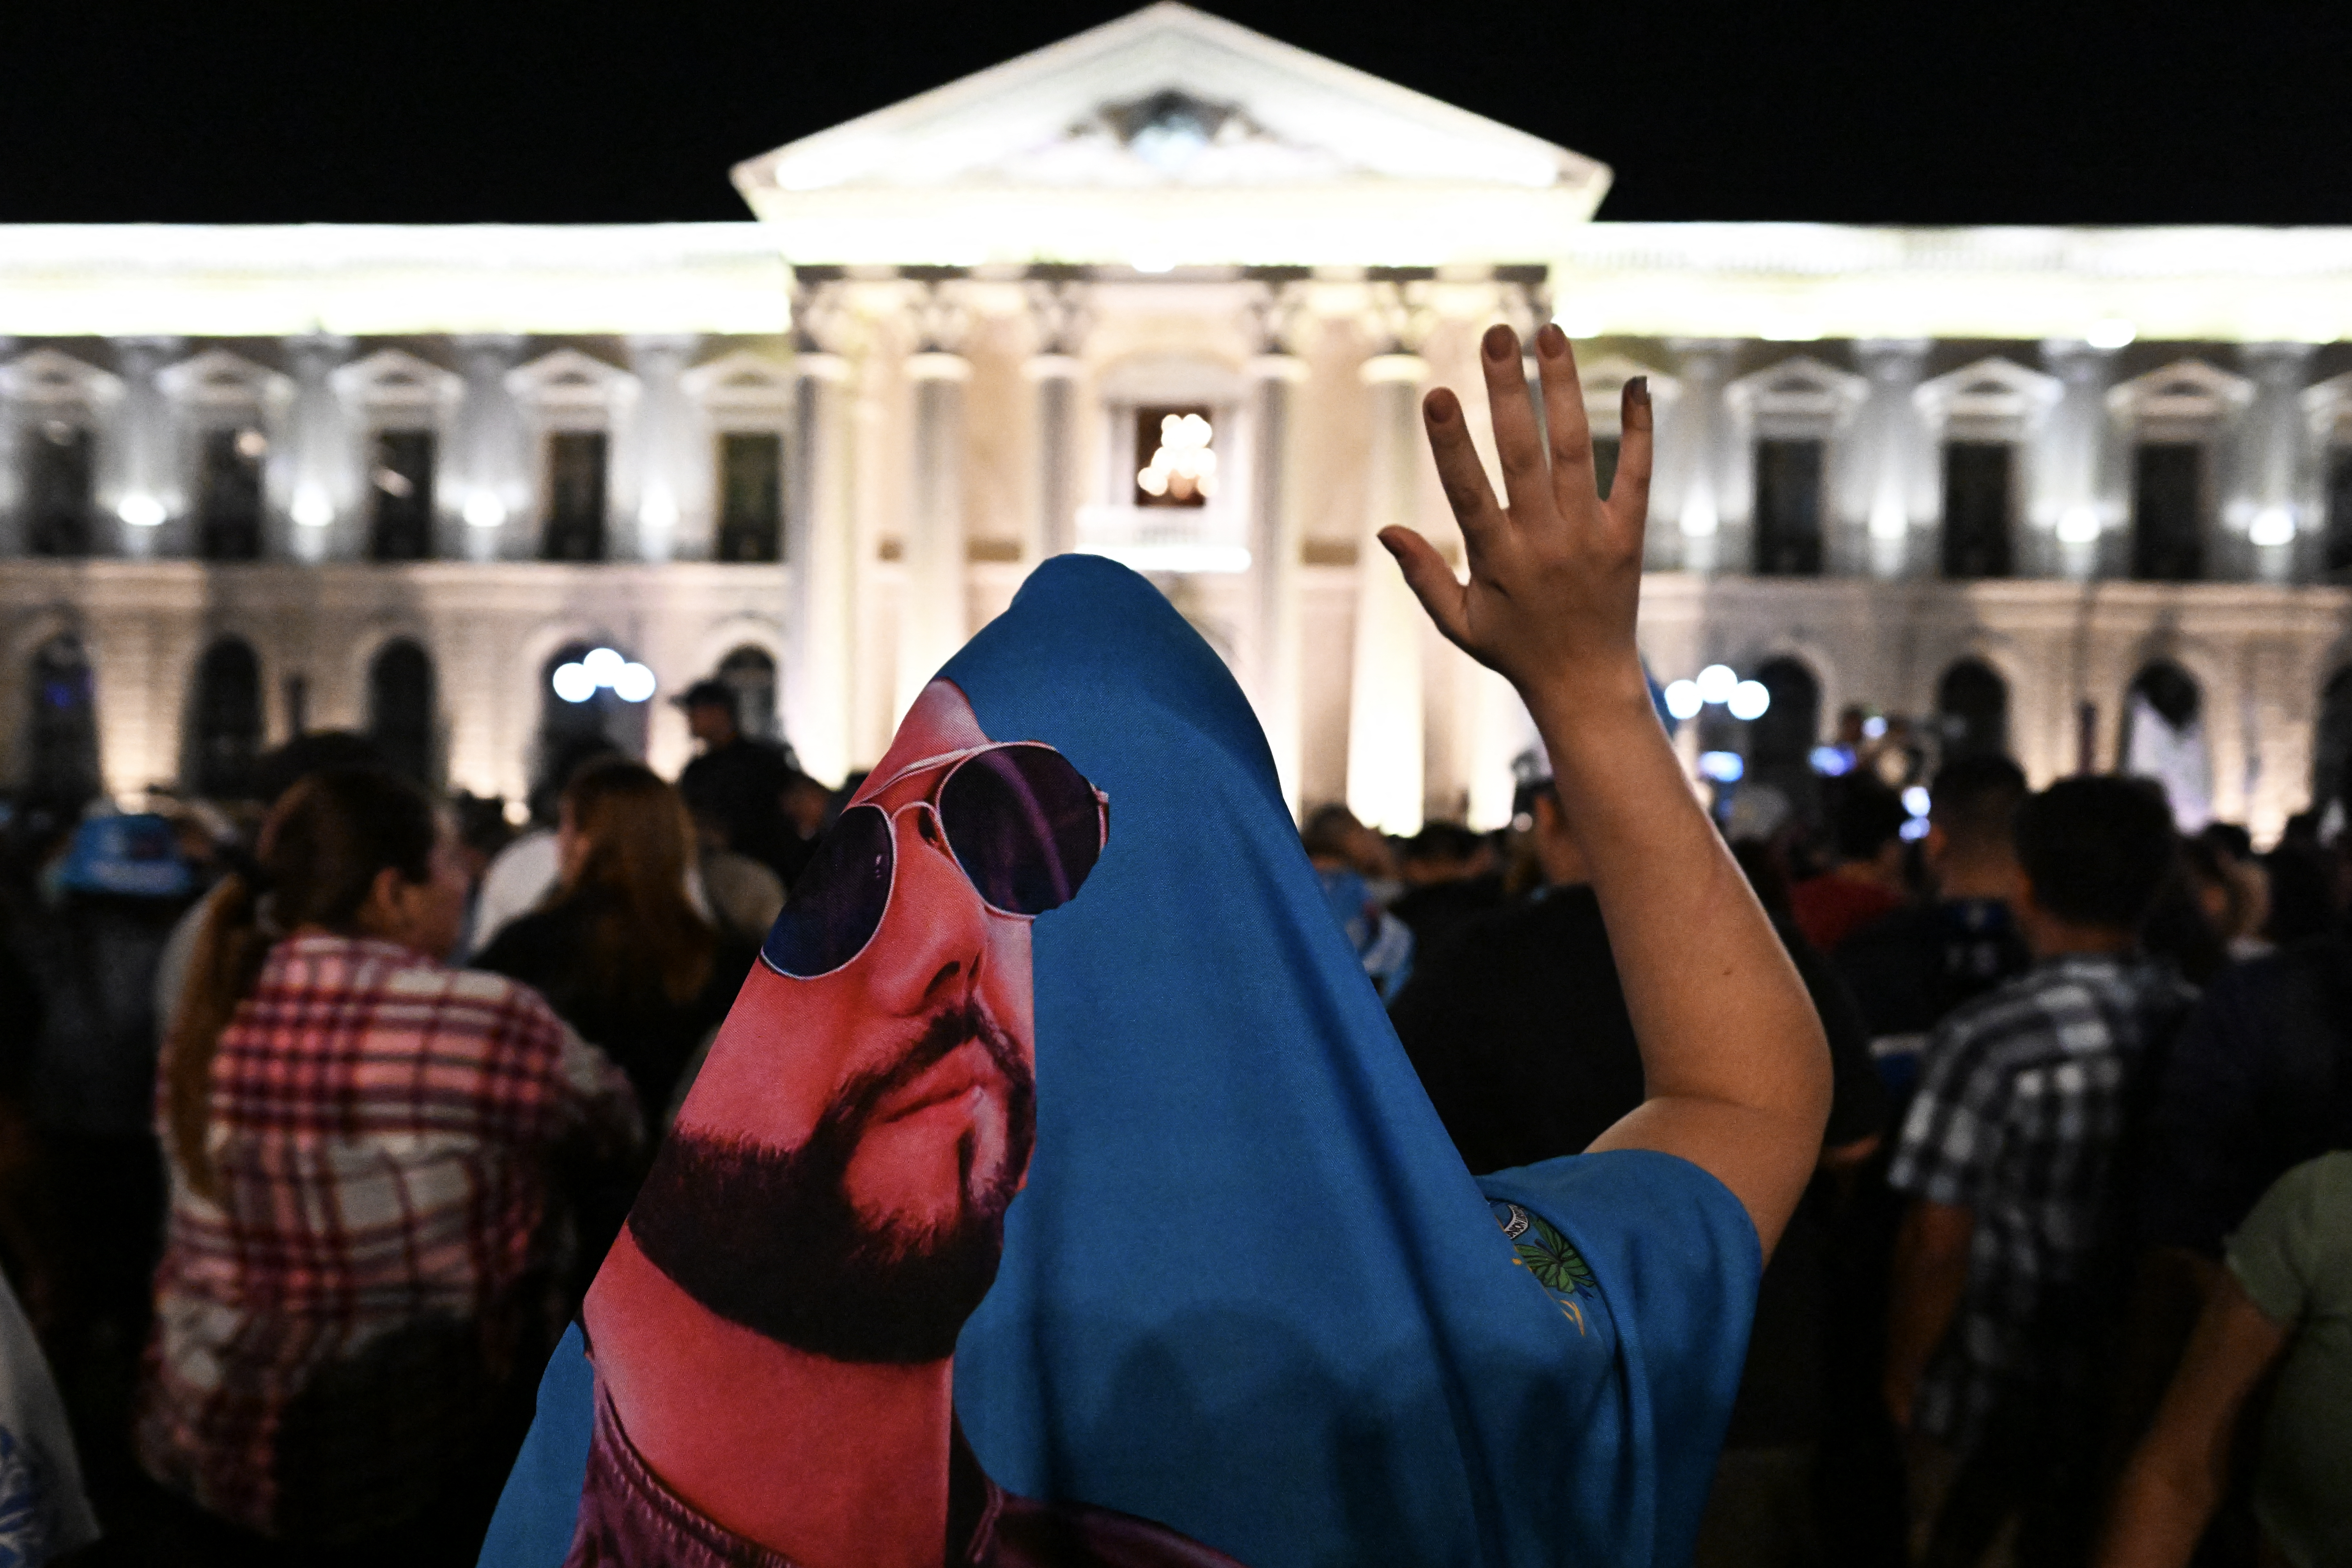 Bukele supporters gather outside the National Palace in San Salvador at night. The person closest to the camera is draped in a printed image of Bukele wearing sunglasses.